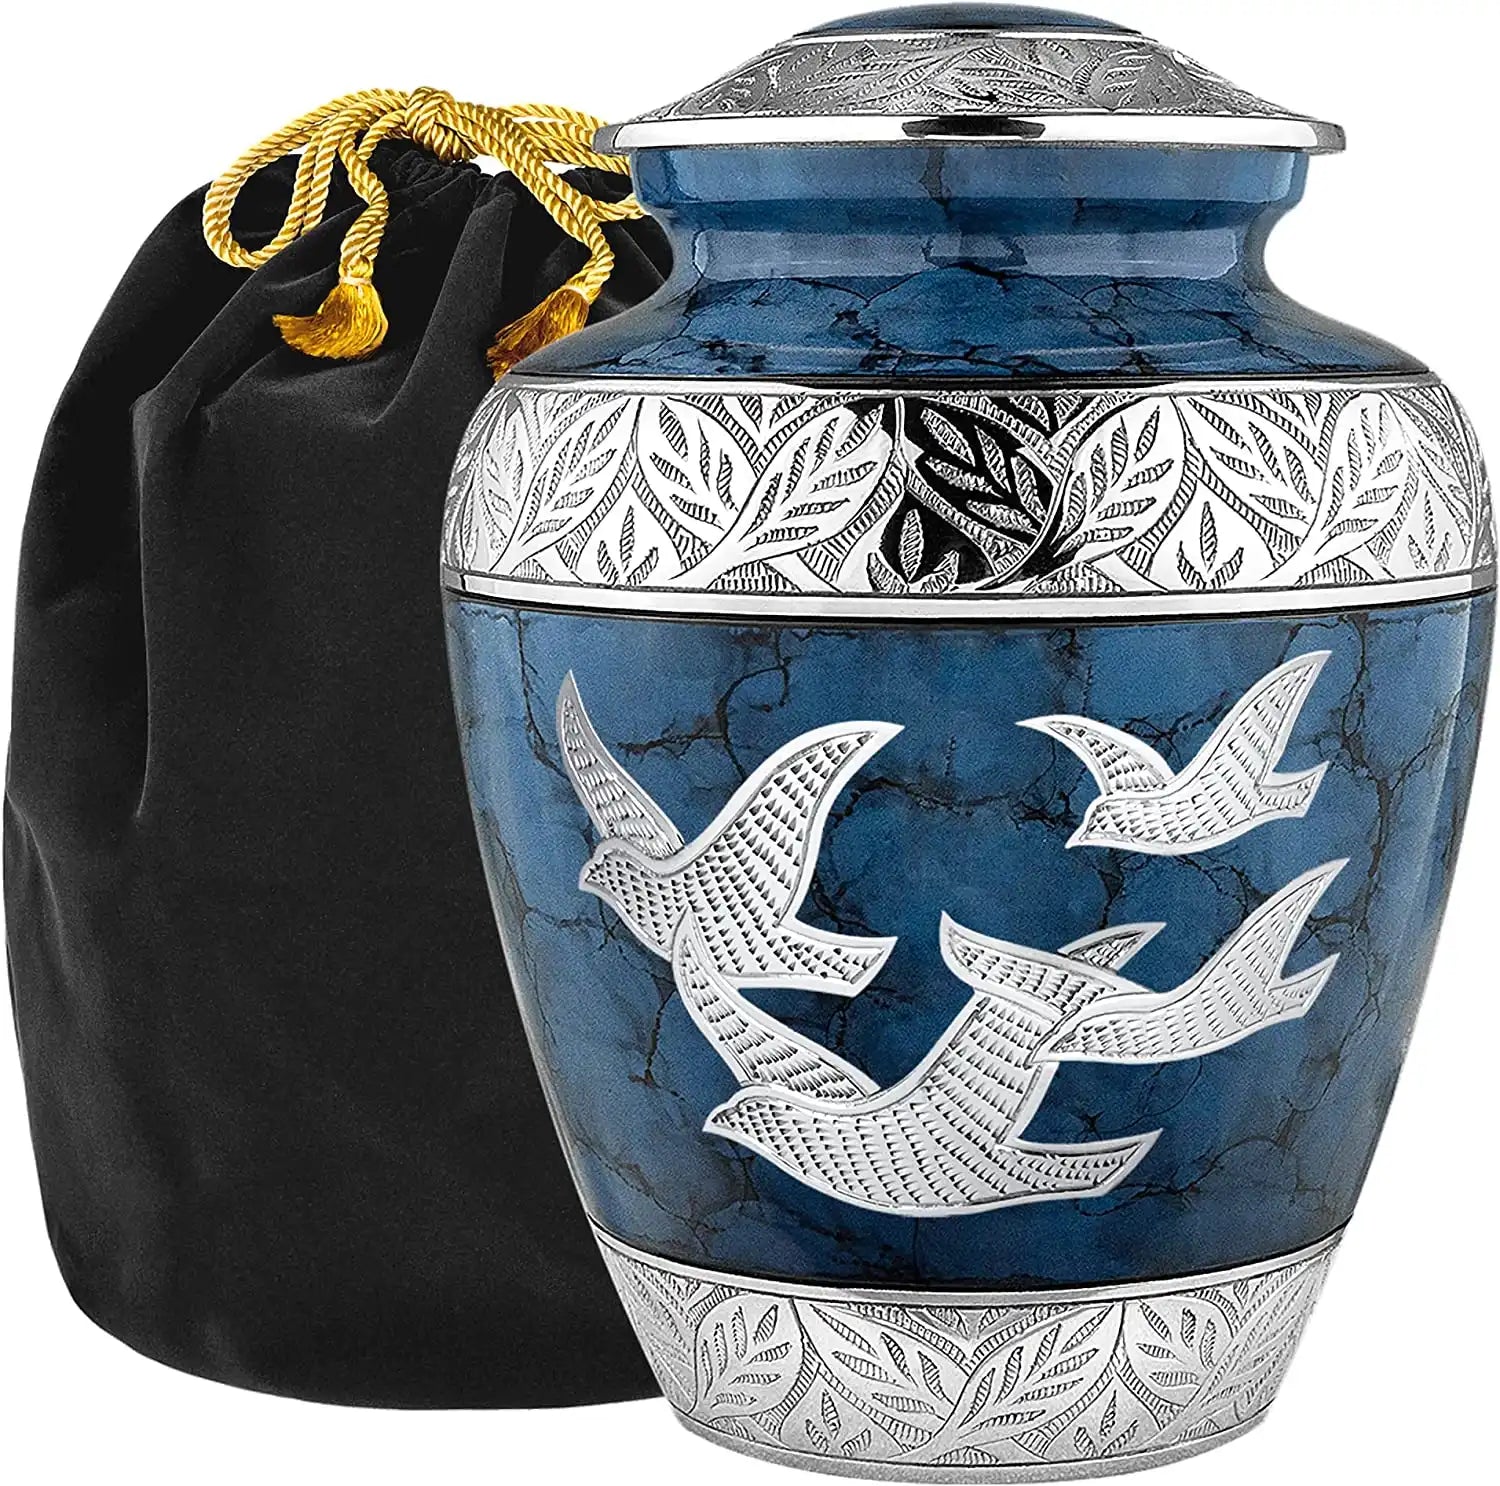 Handcrafted Dark Blue With Dove Urn for Ashes- Handcrafted Cremation Urn, Large Burial Urns for Ashes Adult Male - Urns for Human Ashes Adult Female, Funeral Decorative Urns - Up to 200 LBS